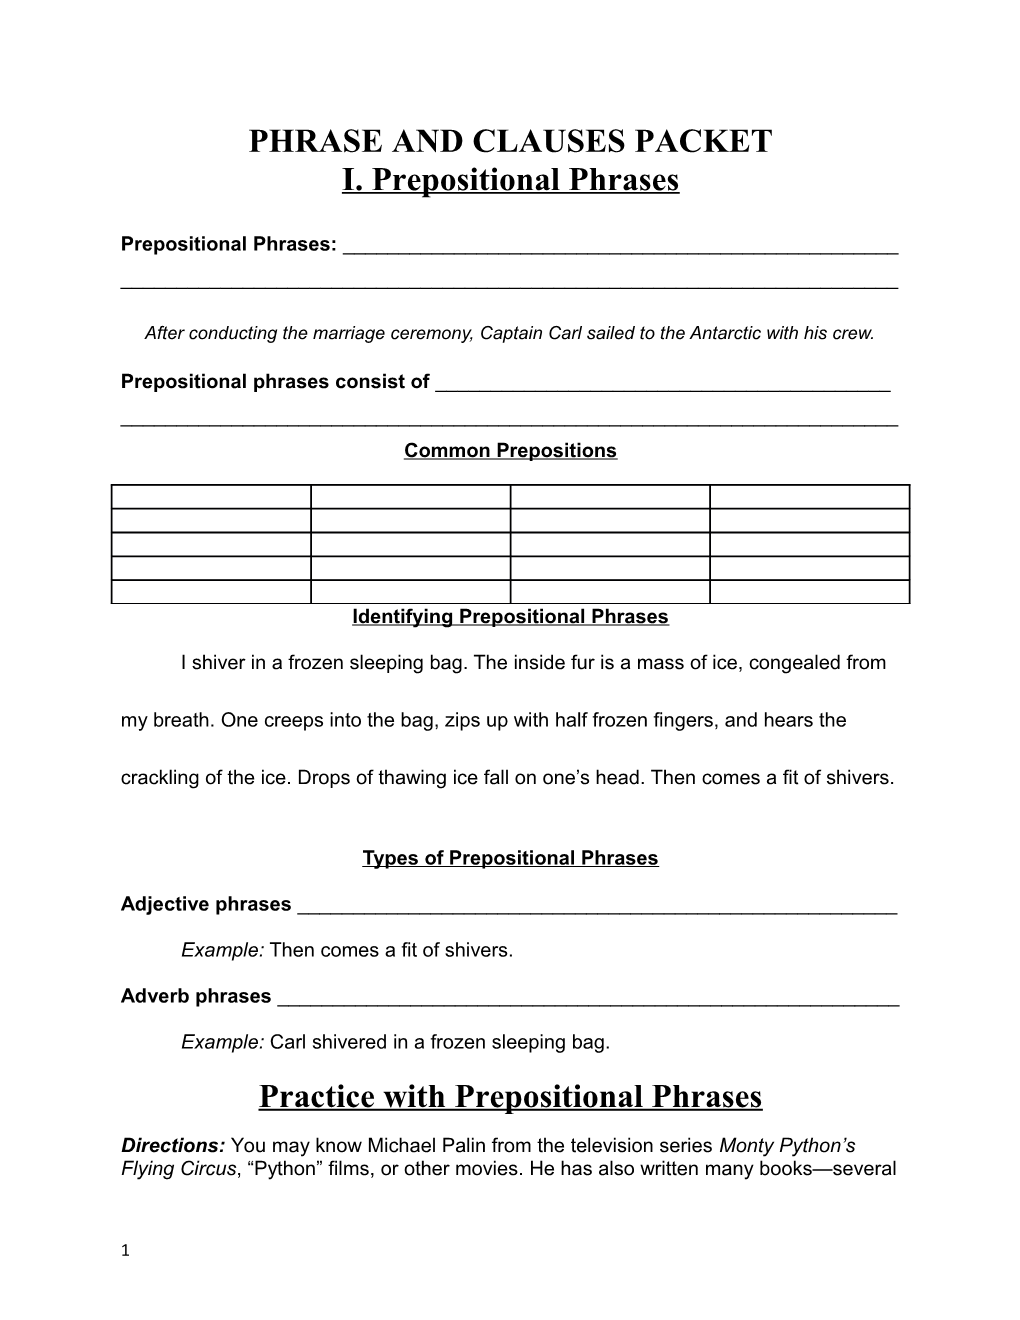 Phrase and Clauses Packet